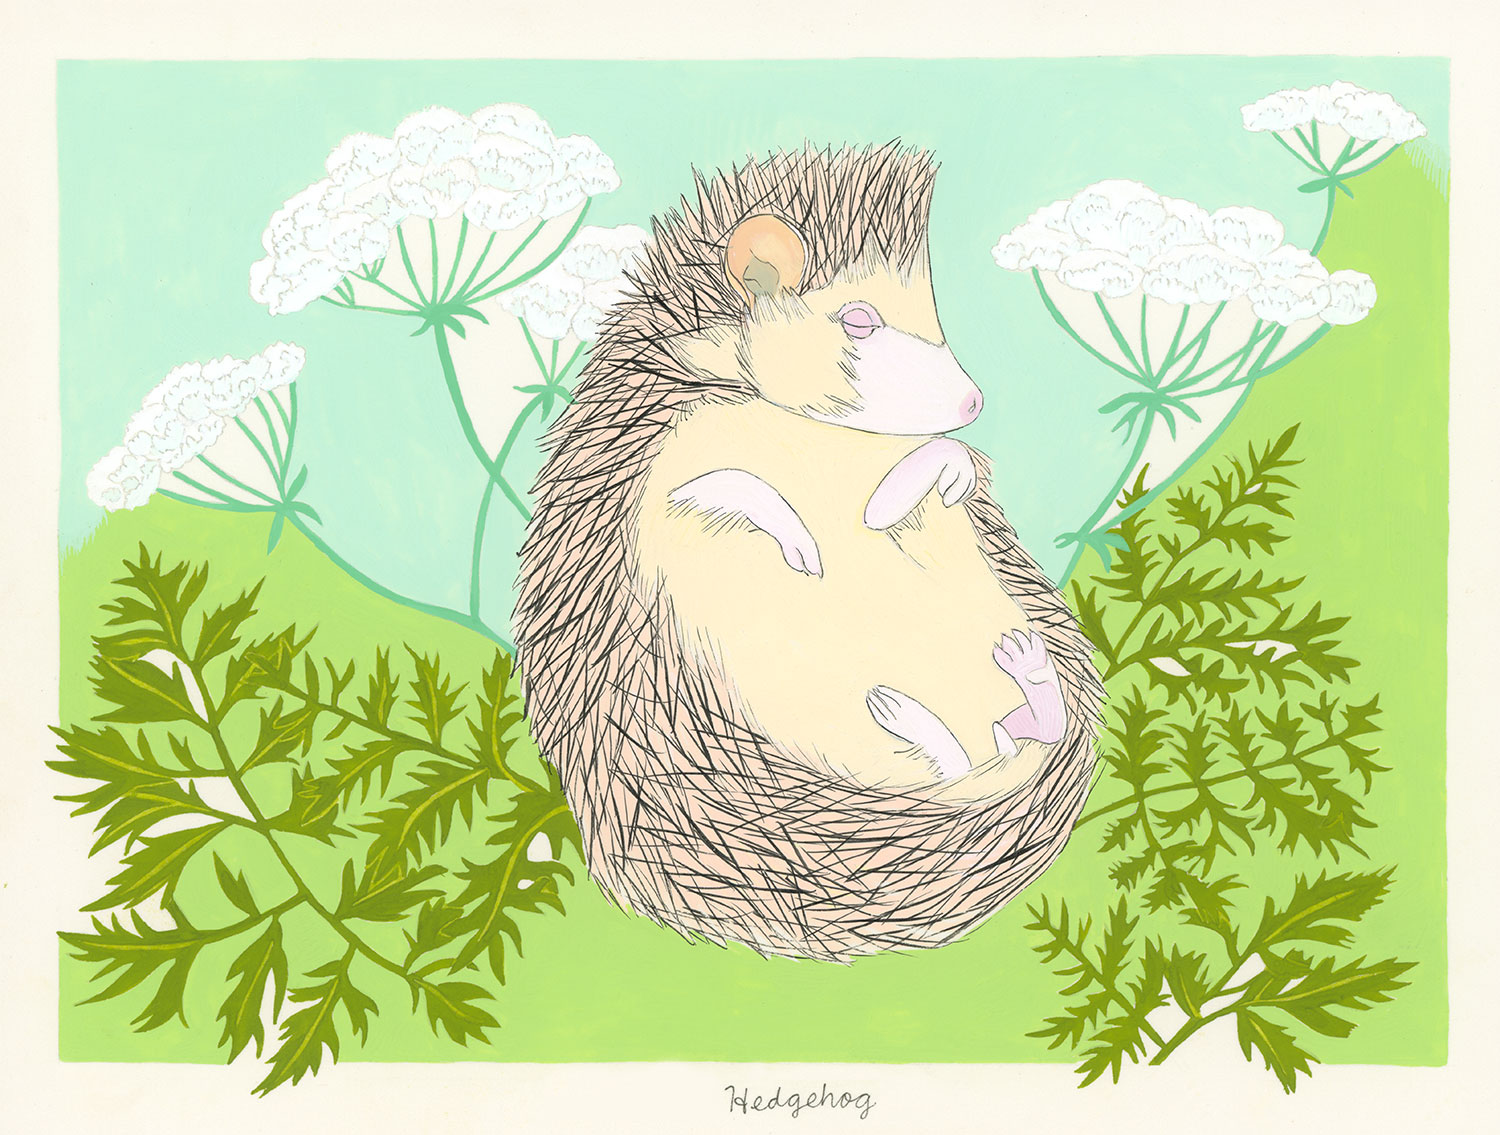 Hedgehog and Hemlock (for the one named Darcy)